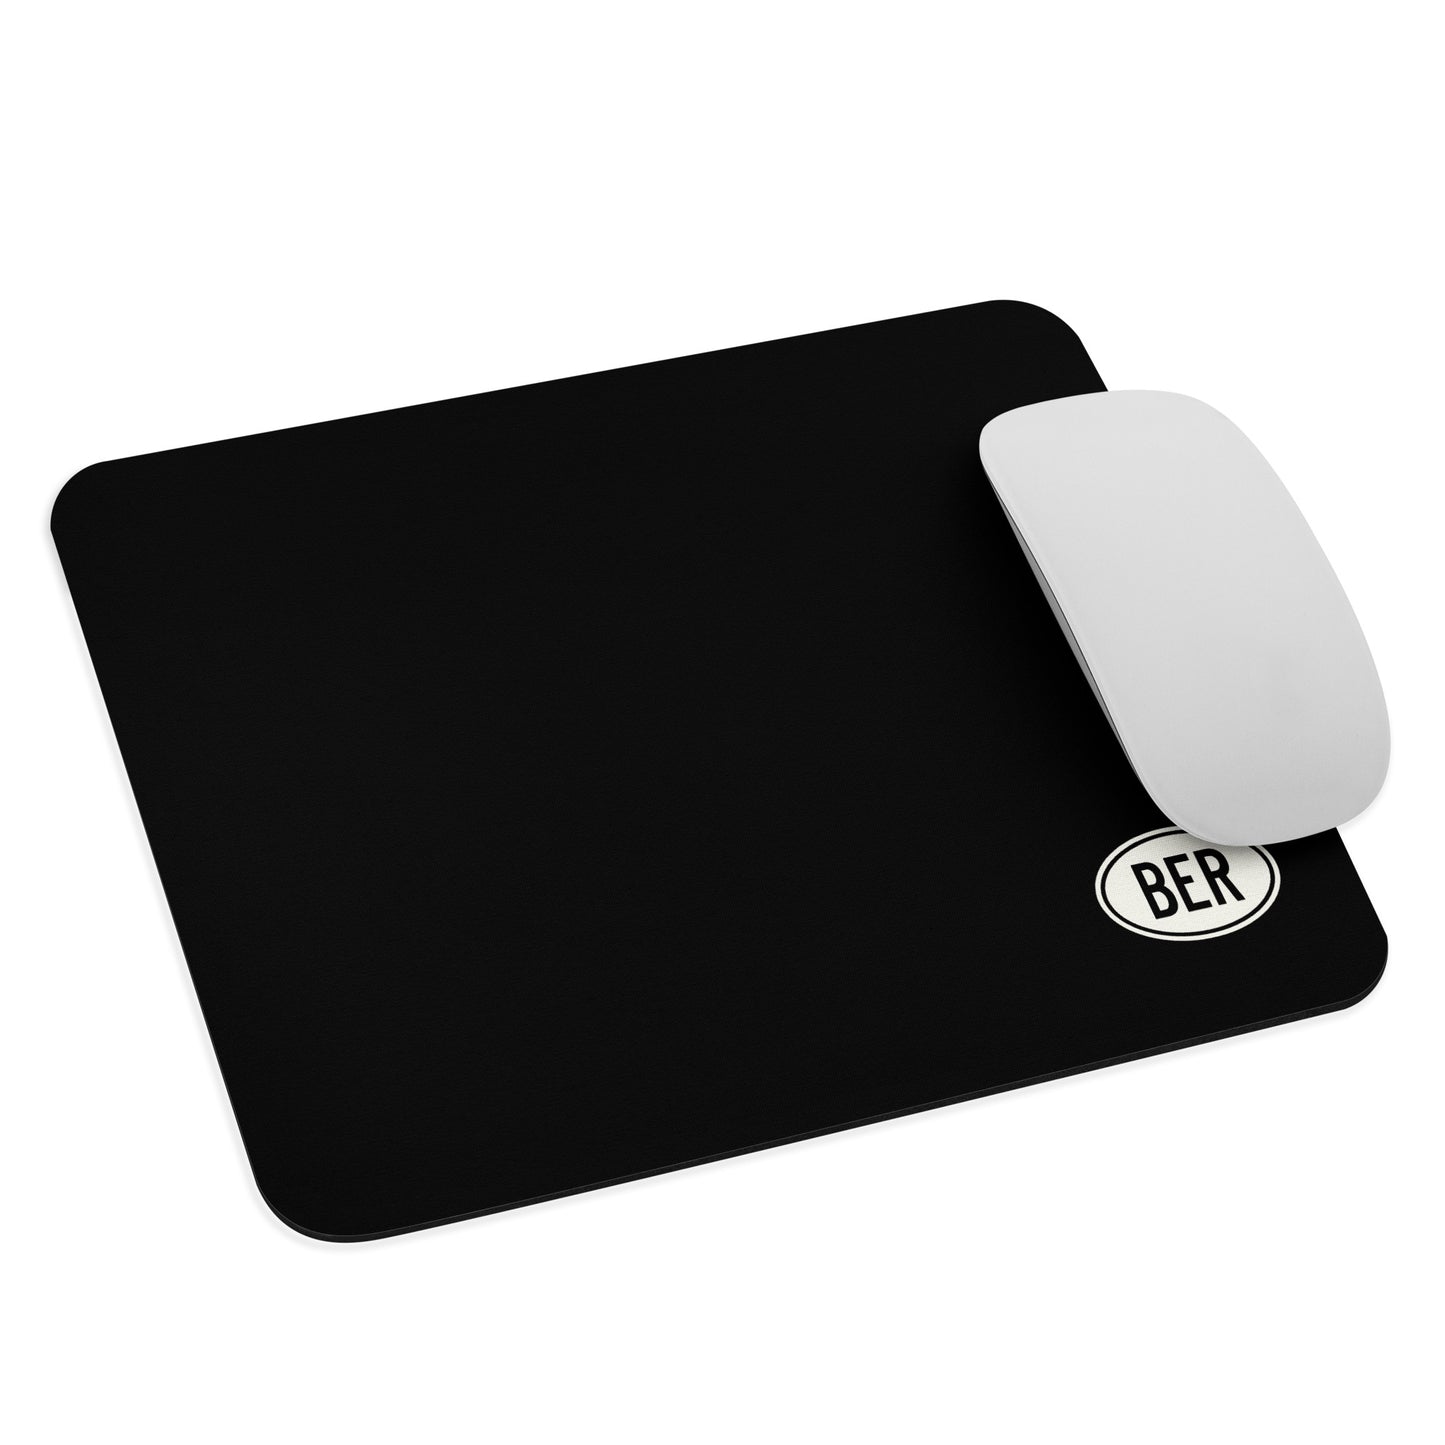 Unique Travel Gift Mouse Pad - White Oval • BER Berlin • YHM Designs - Image 03